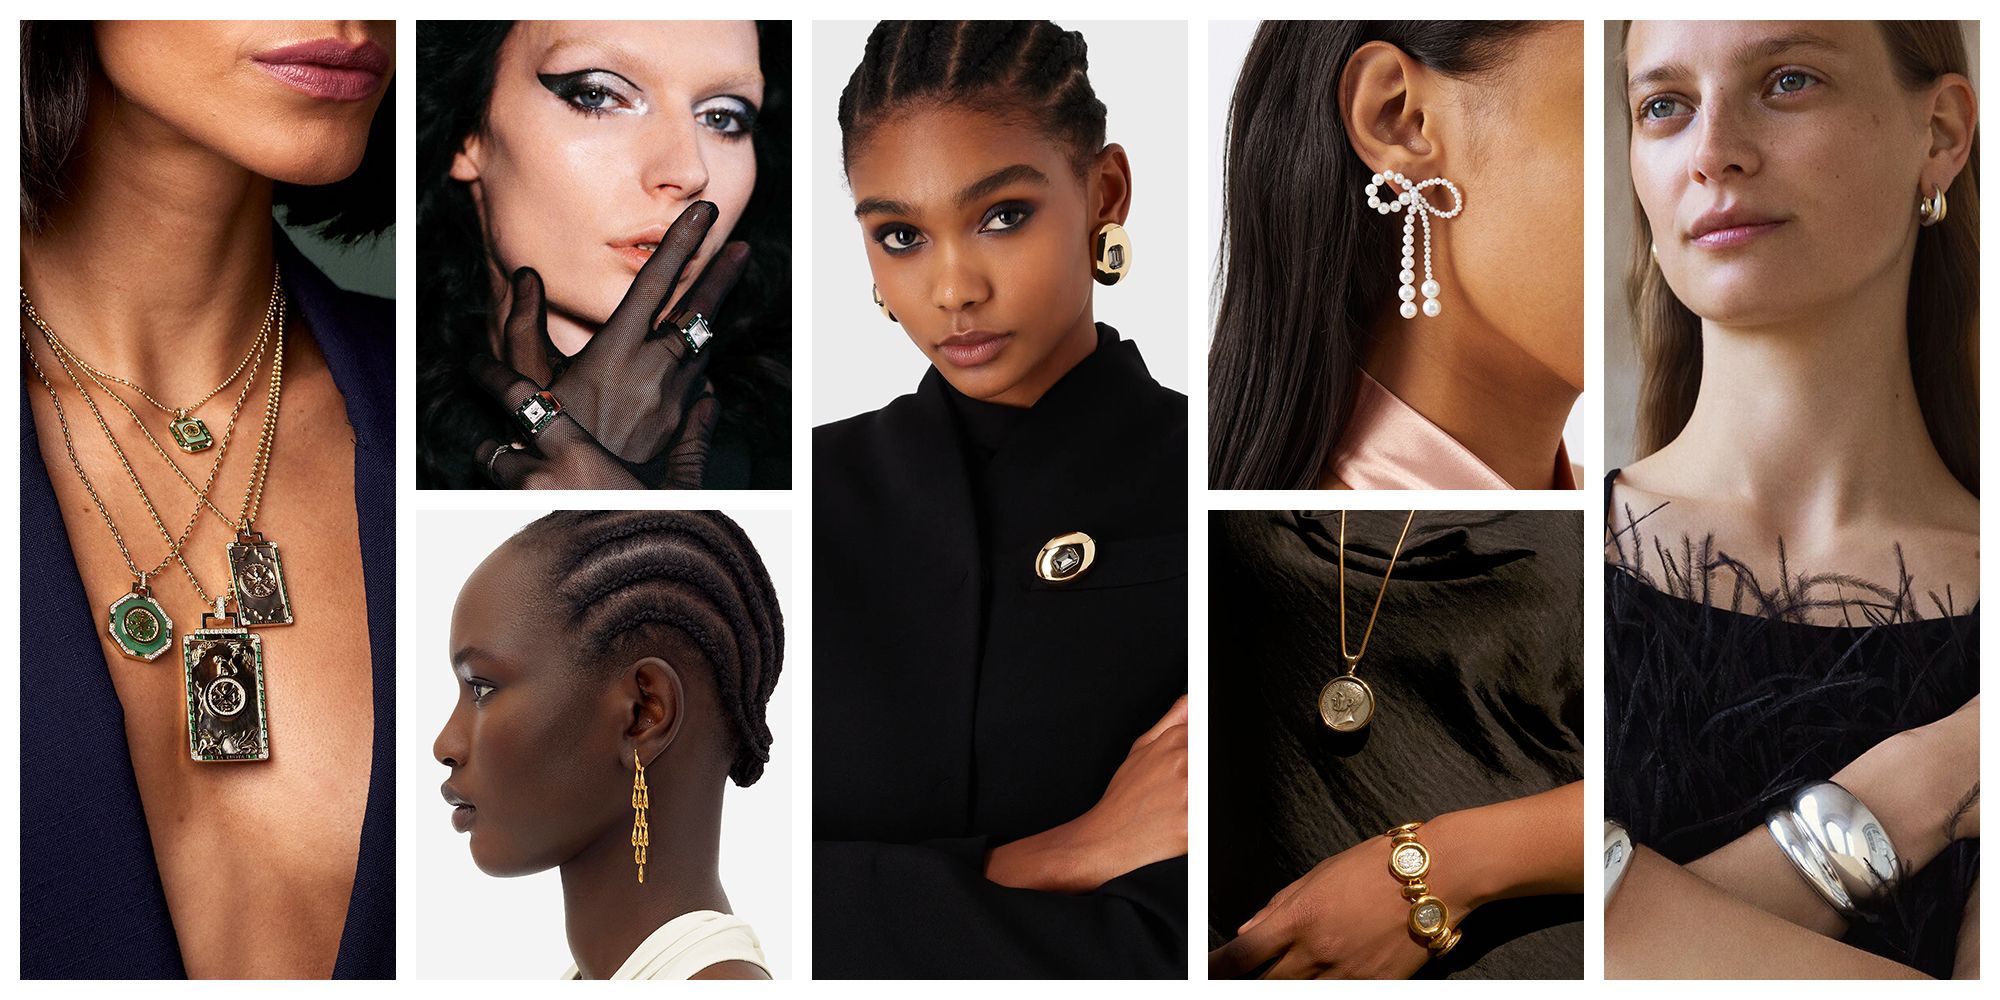 CUFFED AND CHIC: How To Style These New Bracelet Trends! – STAC